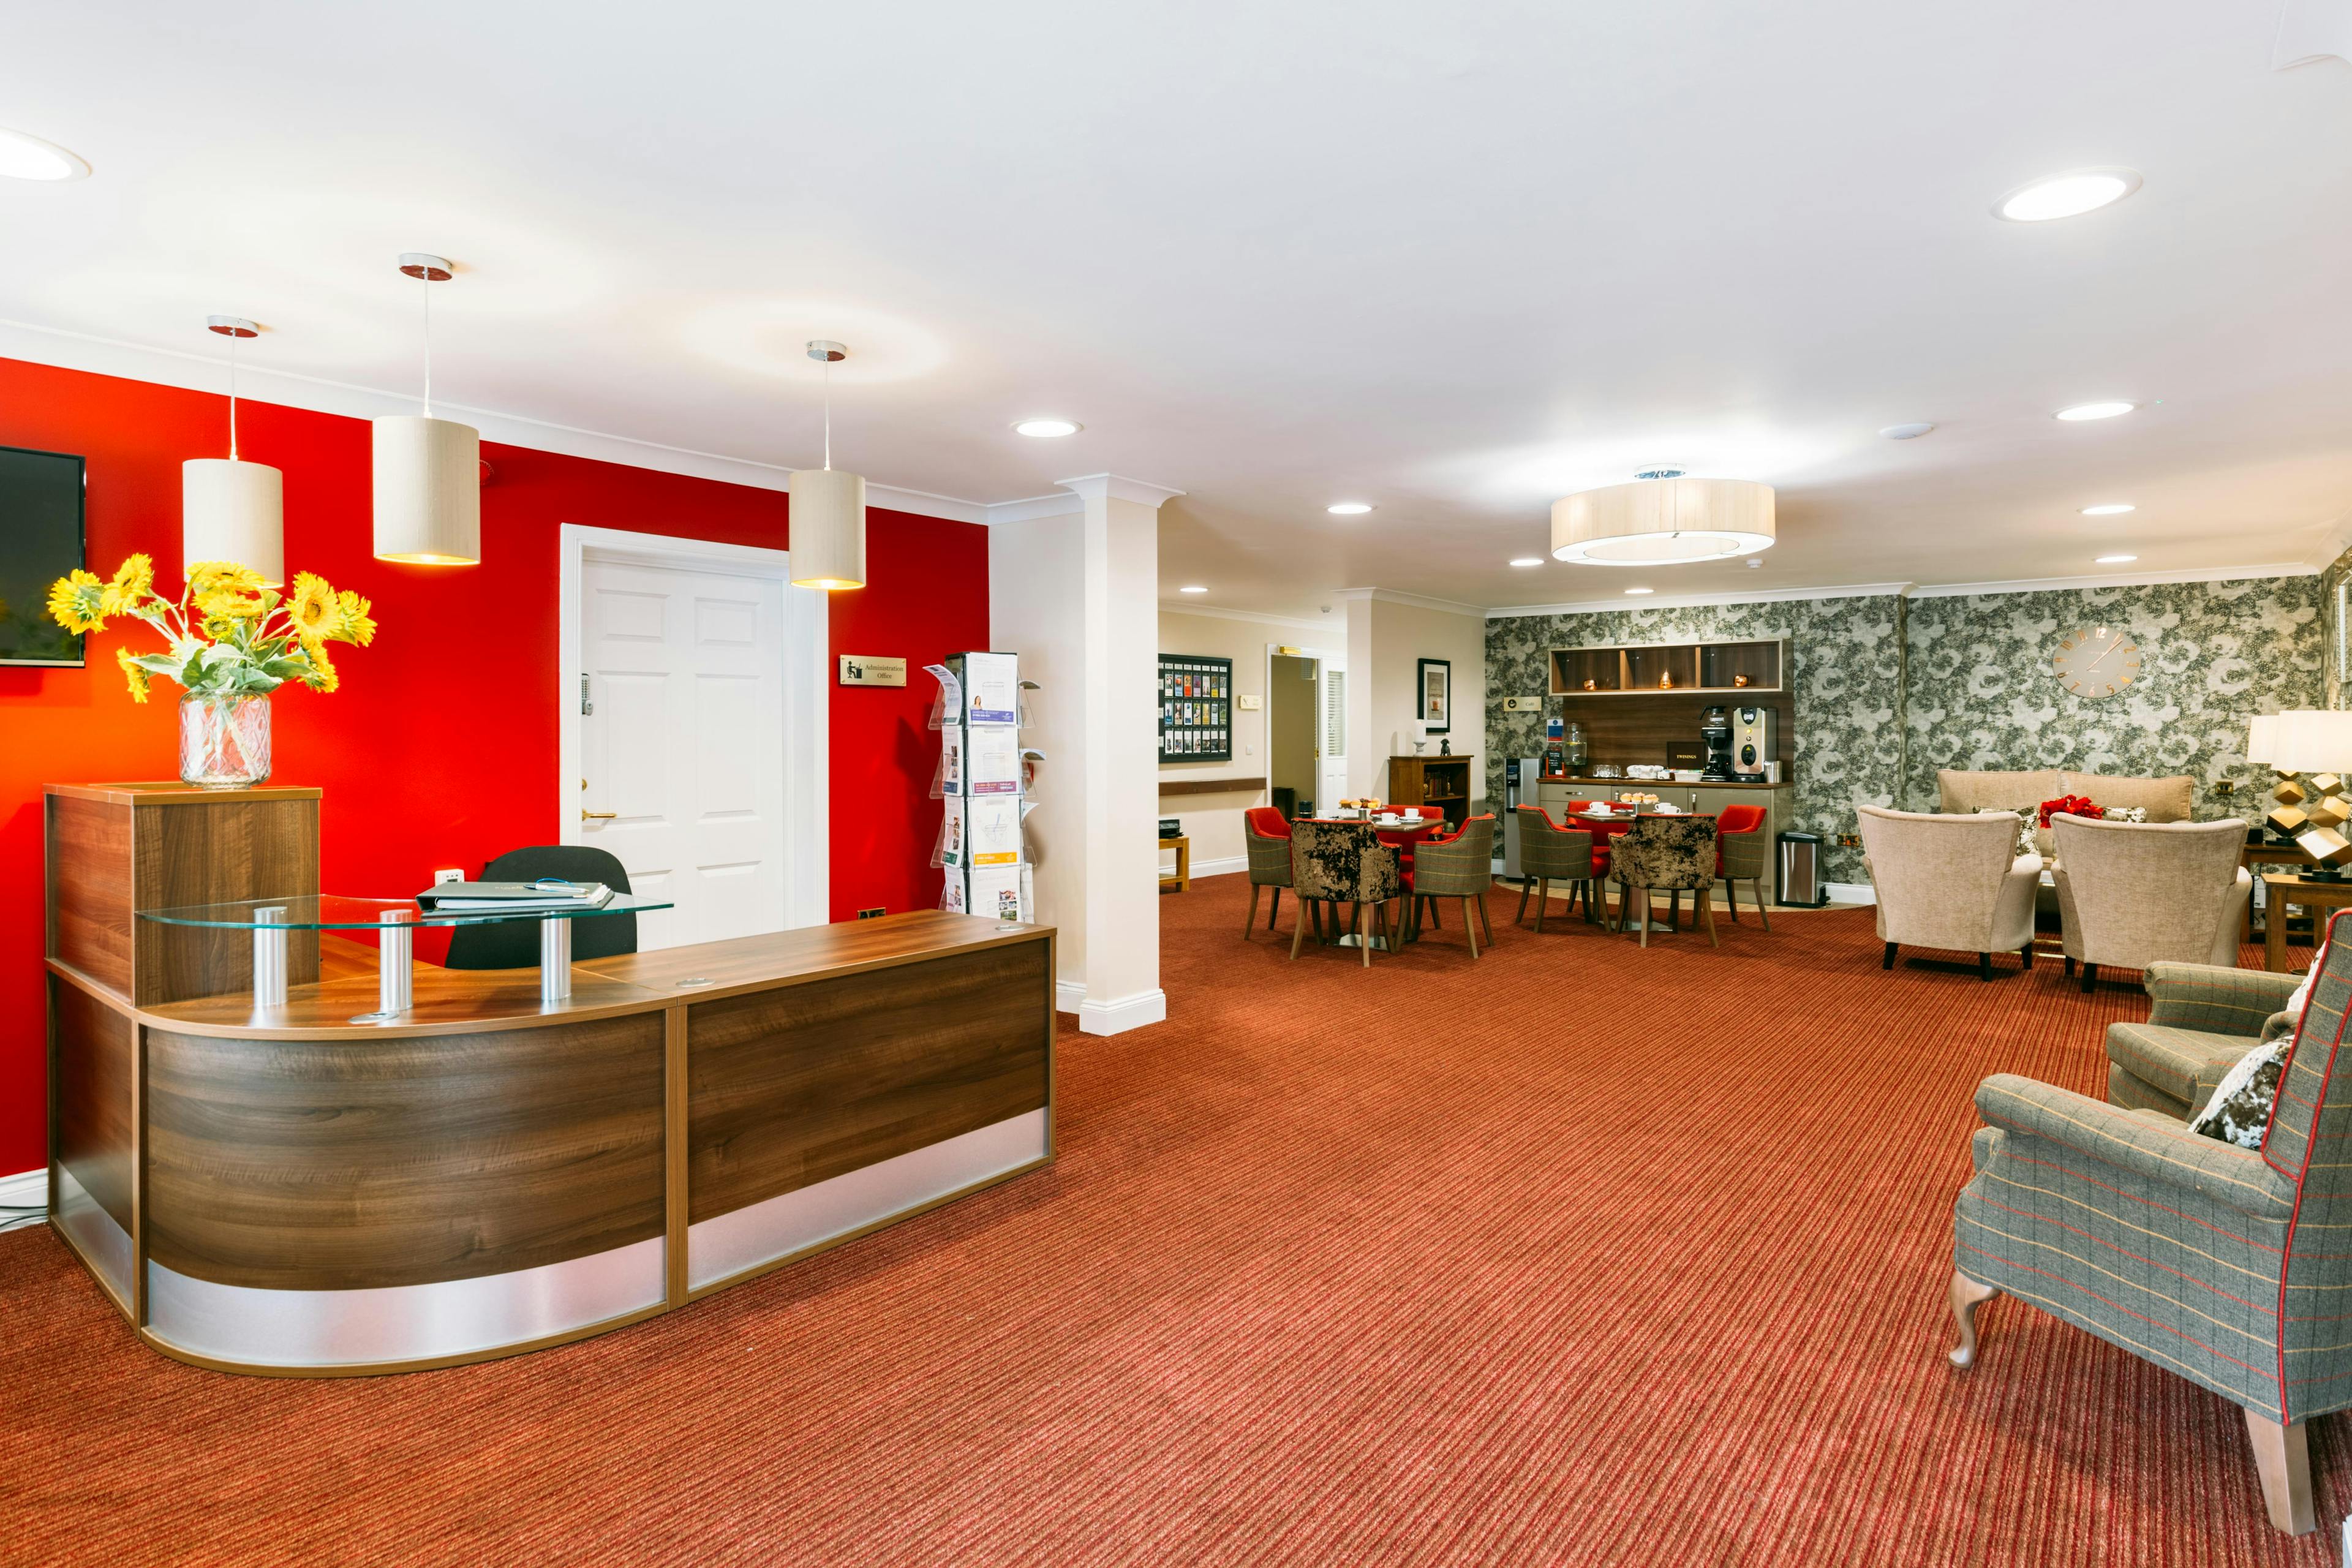 Reception in Orchard House Care Home in Newport, Isle of Wight